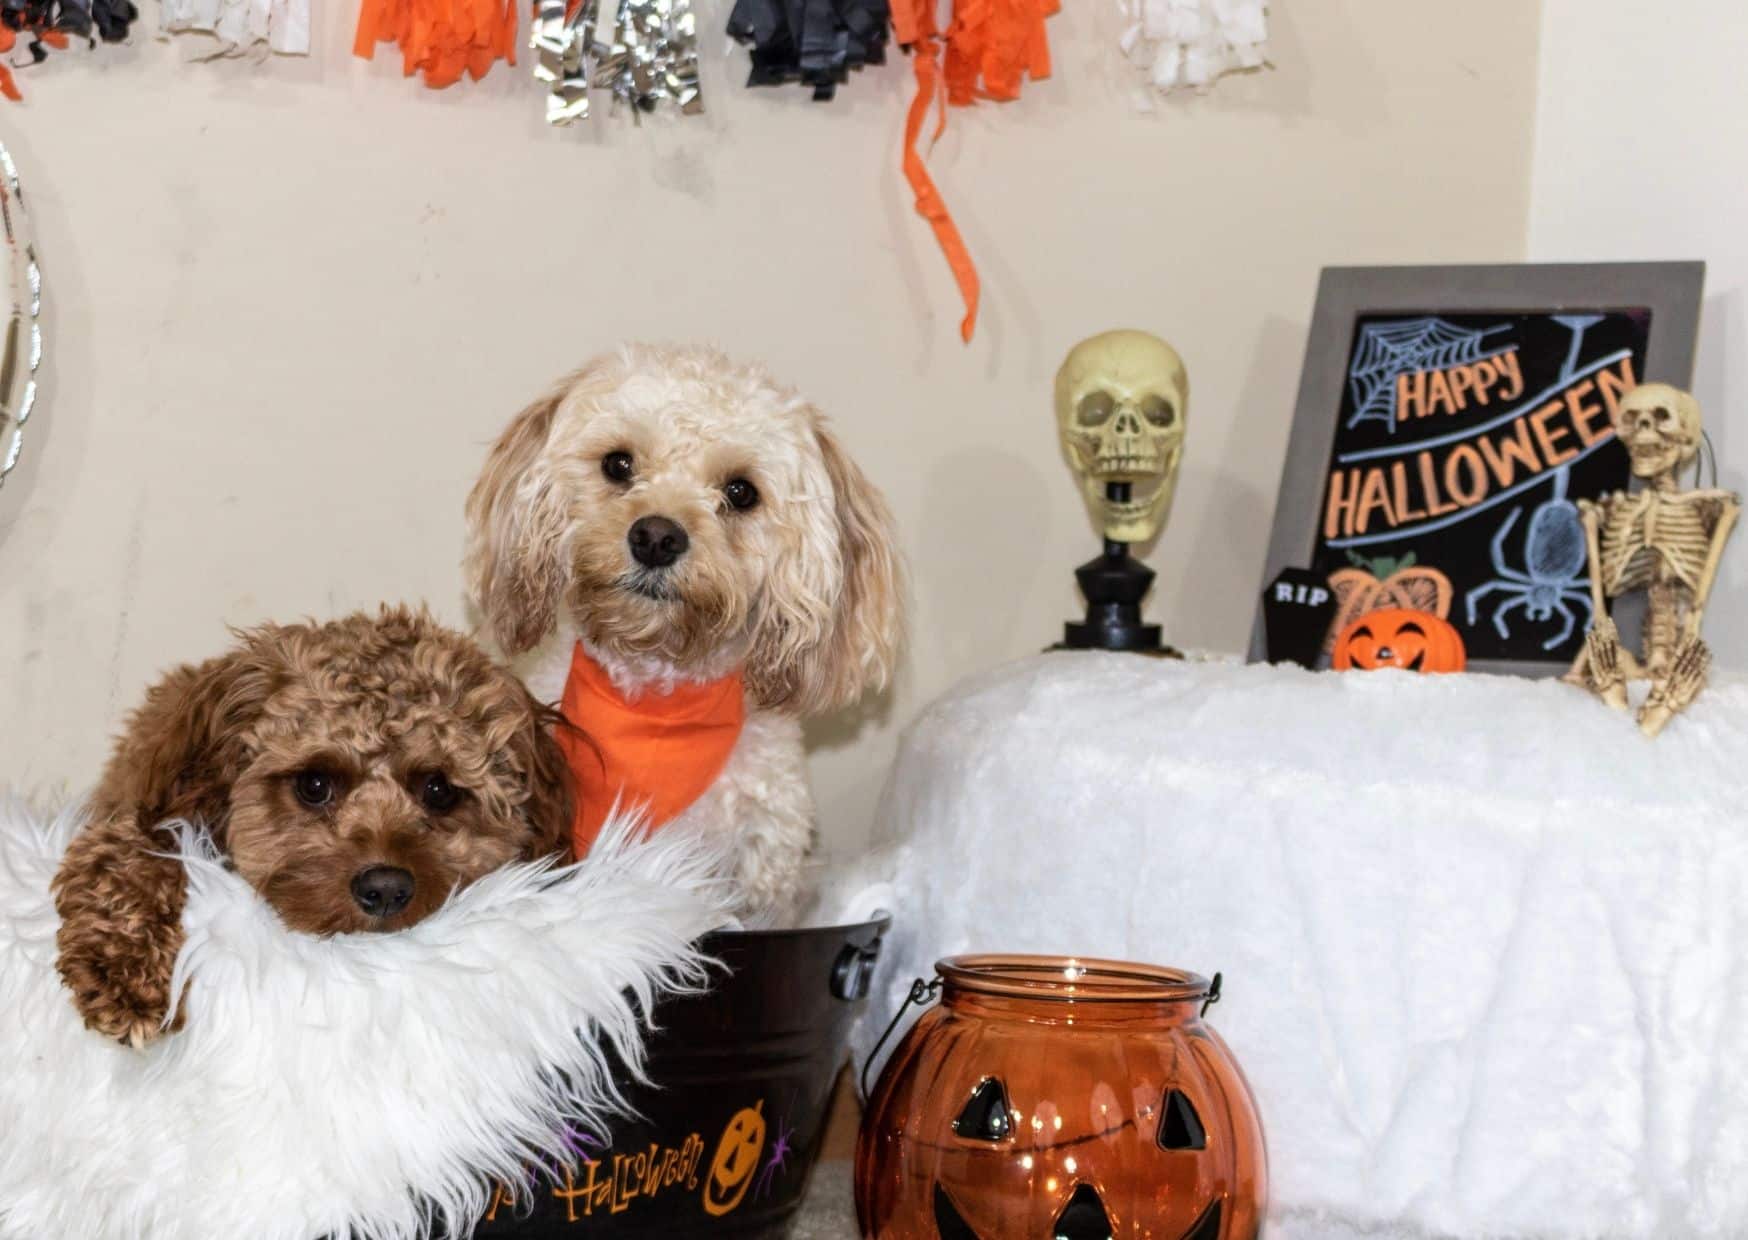 Decorate For A Spooktacular Dog Halloween Party - Halloween Party For Dogs | Pawcool ™